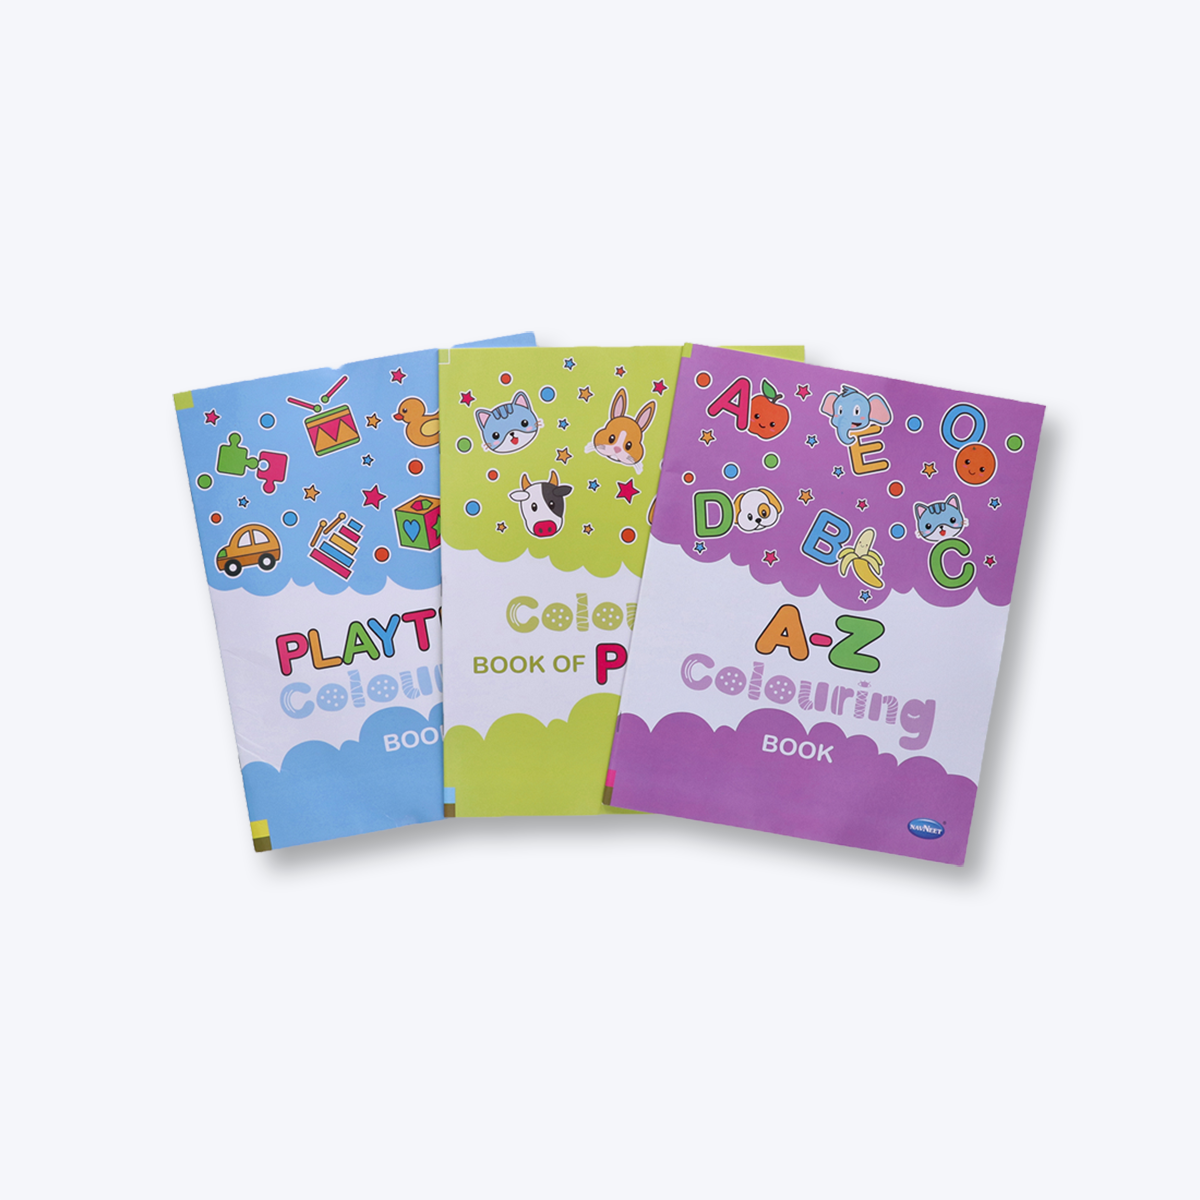 Navneet Colouring book series for kids , theme based series set of 3 books - colouring Book- Play time , pets, A-Z Colouring Book.